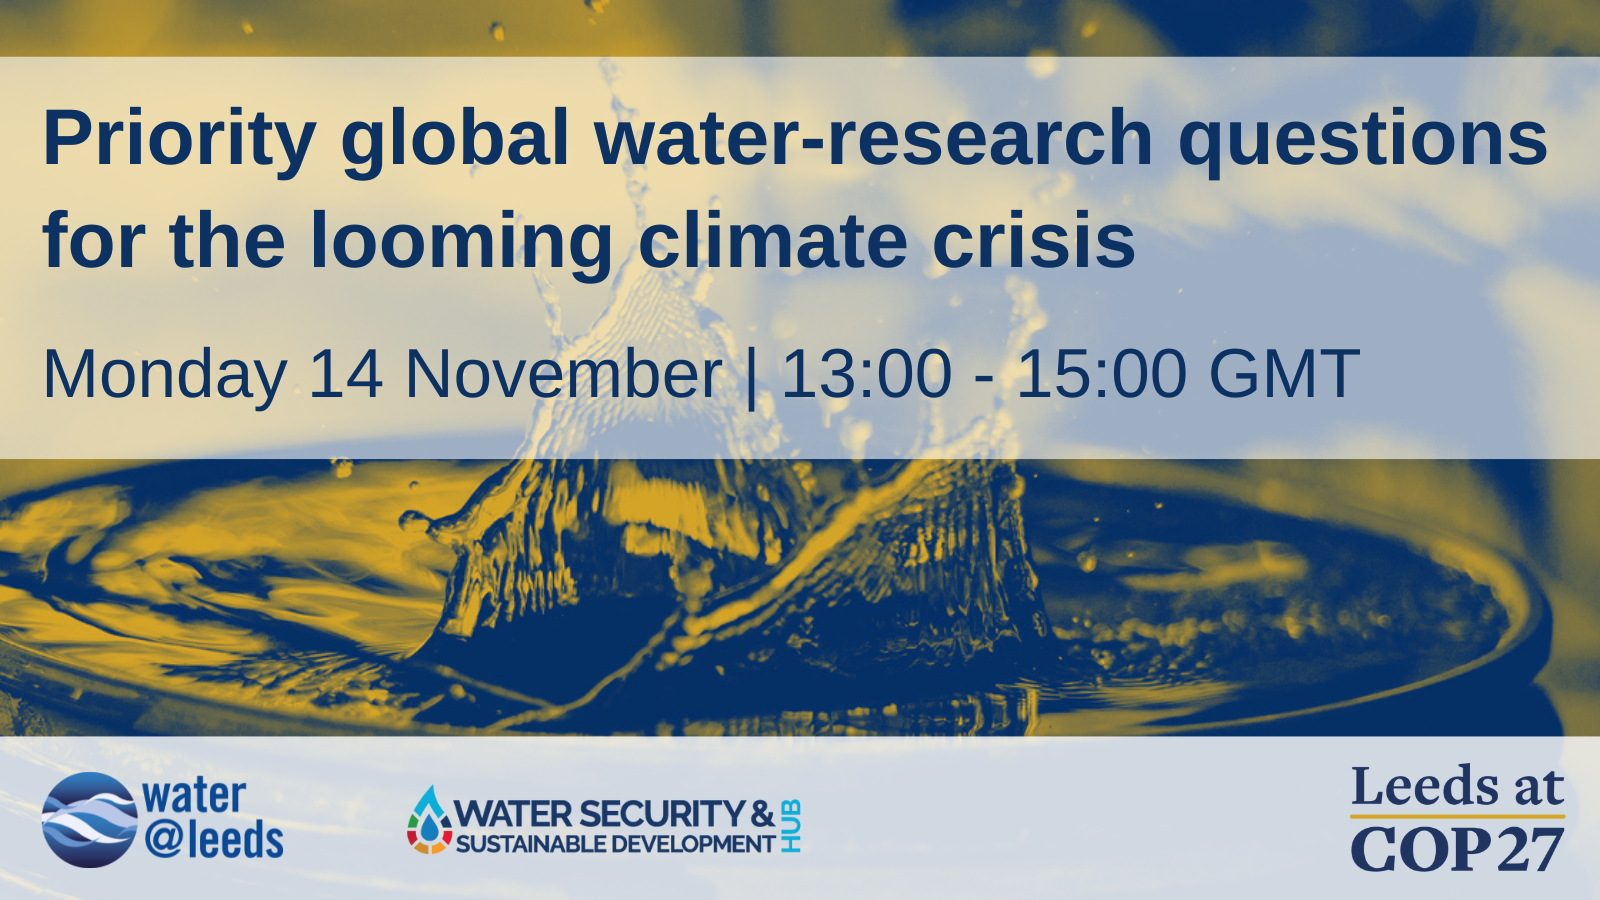 Priority global water-research questions for the looming climate crisis